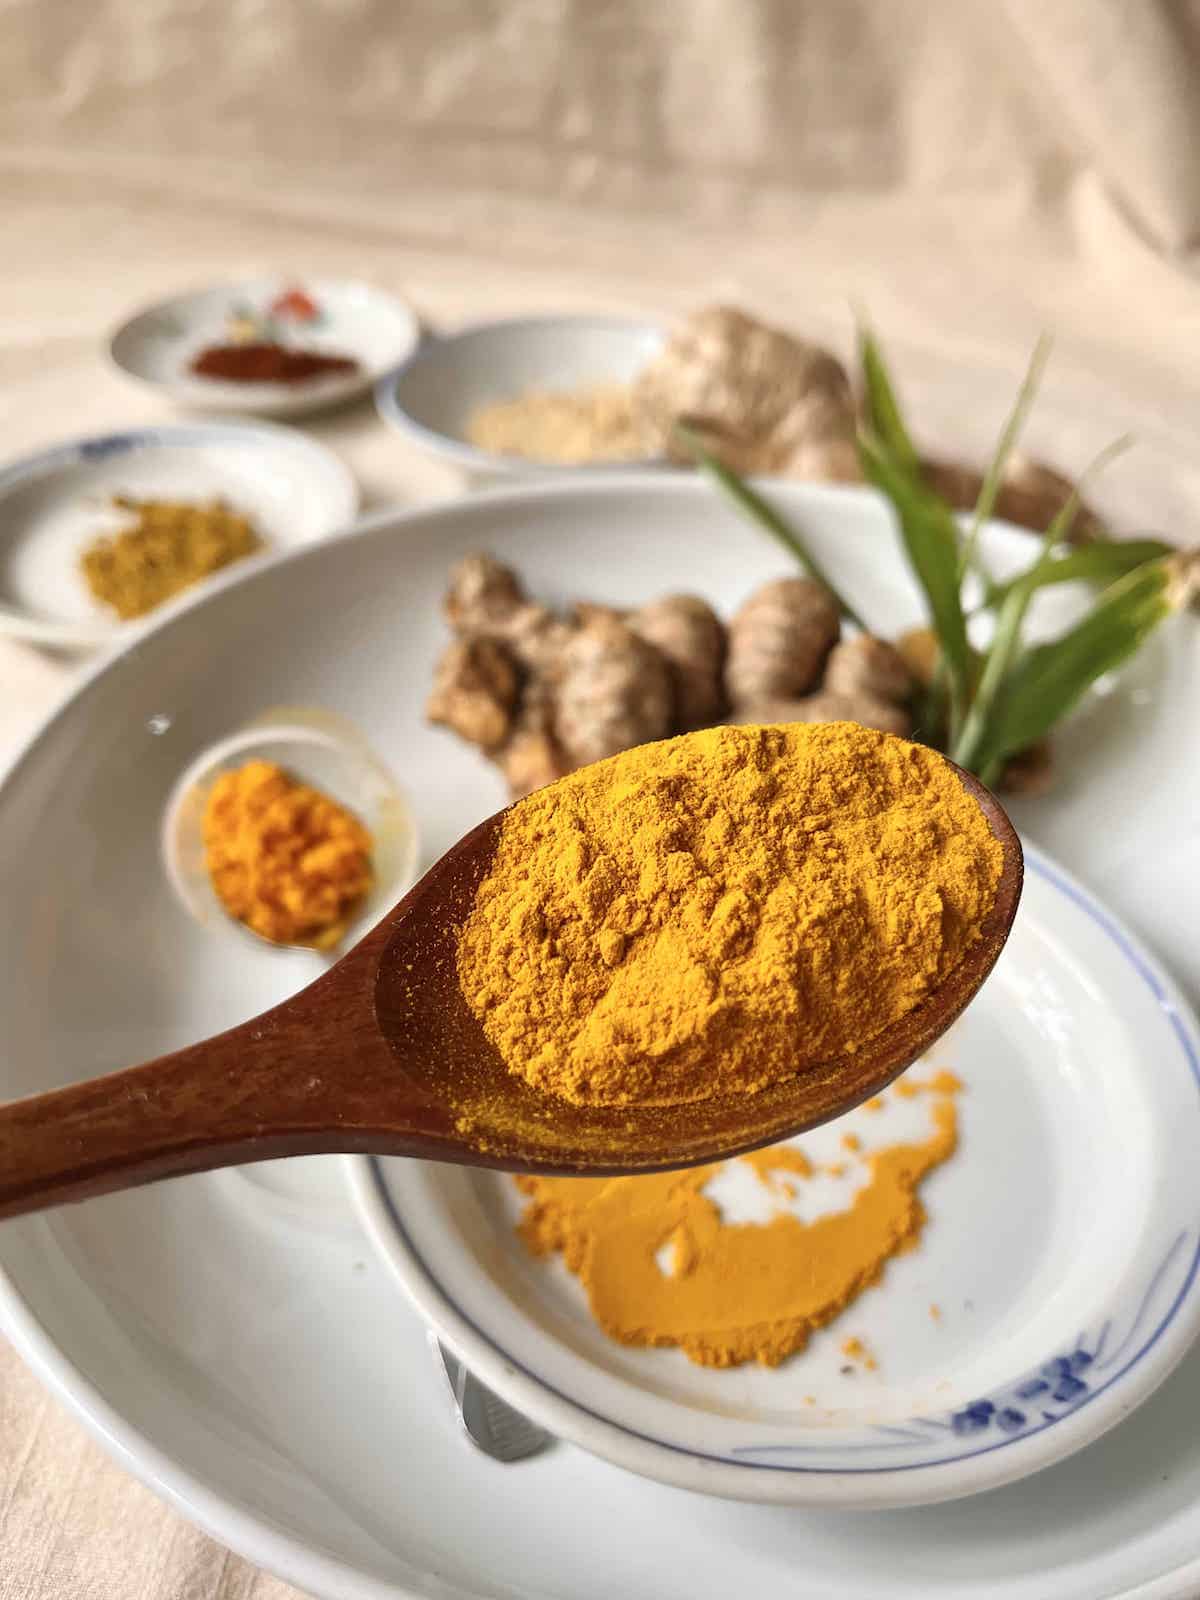 A spoonful of orange turmeric powder with substitutes in the background.